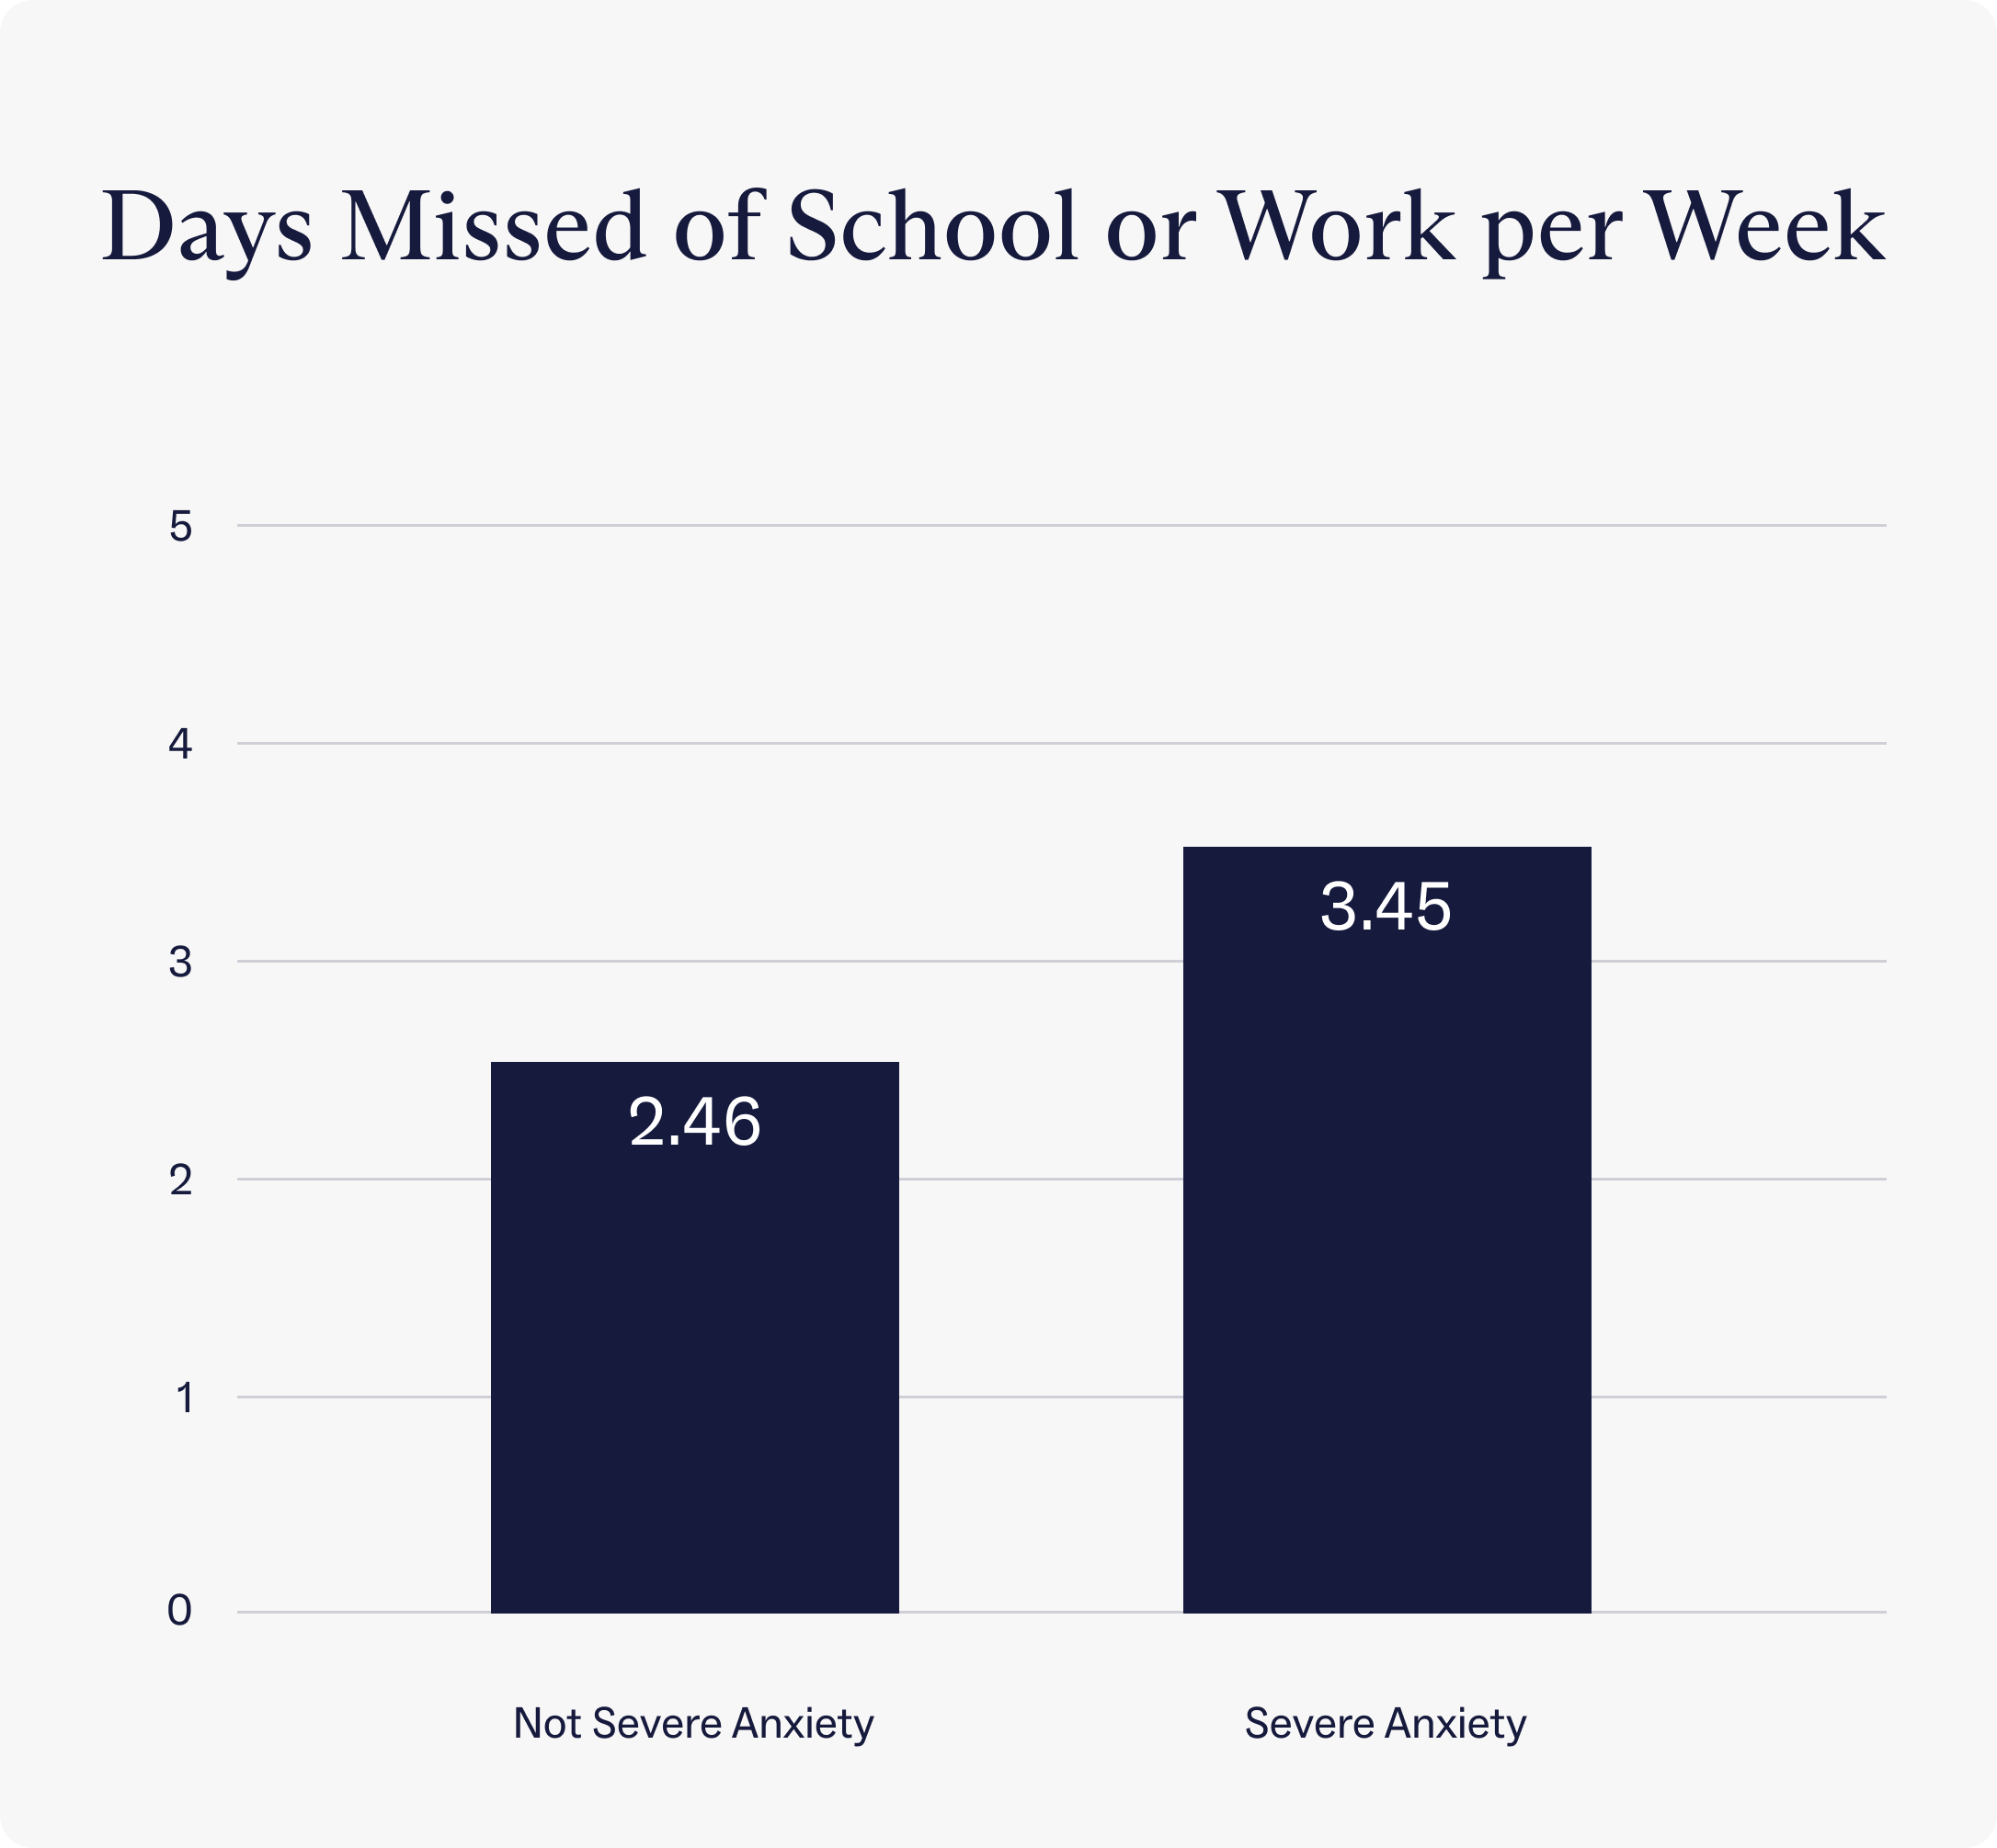 Days missed of school or work per week based on if the person had severe anxiety or not